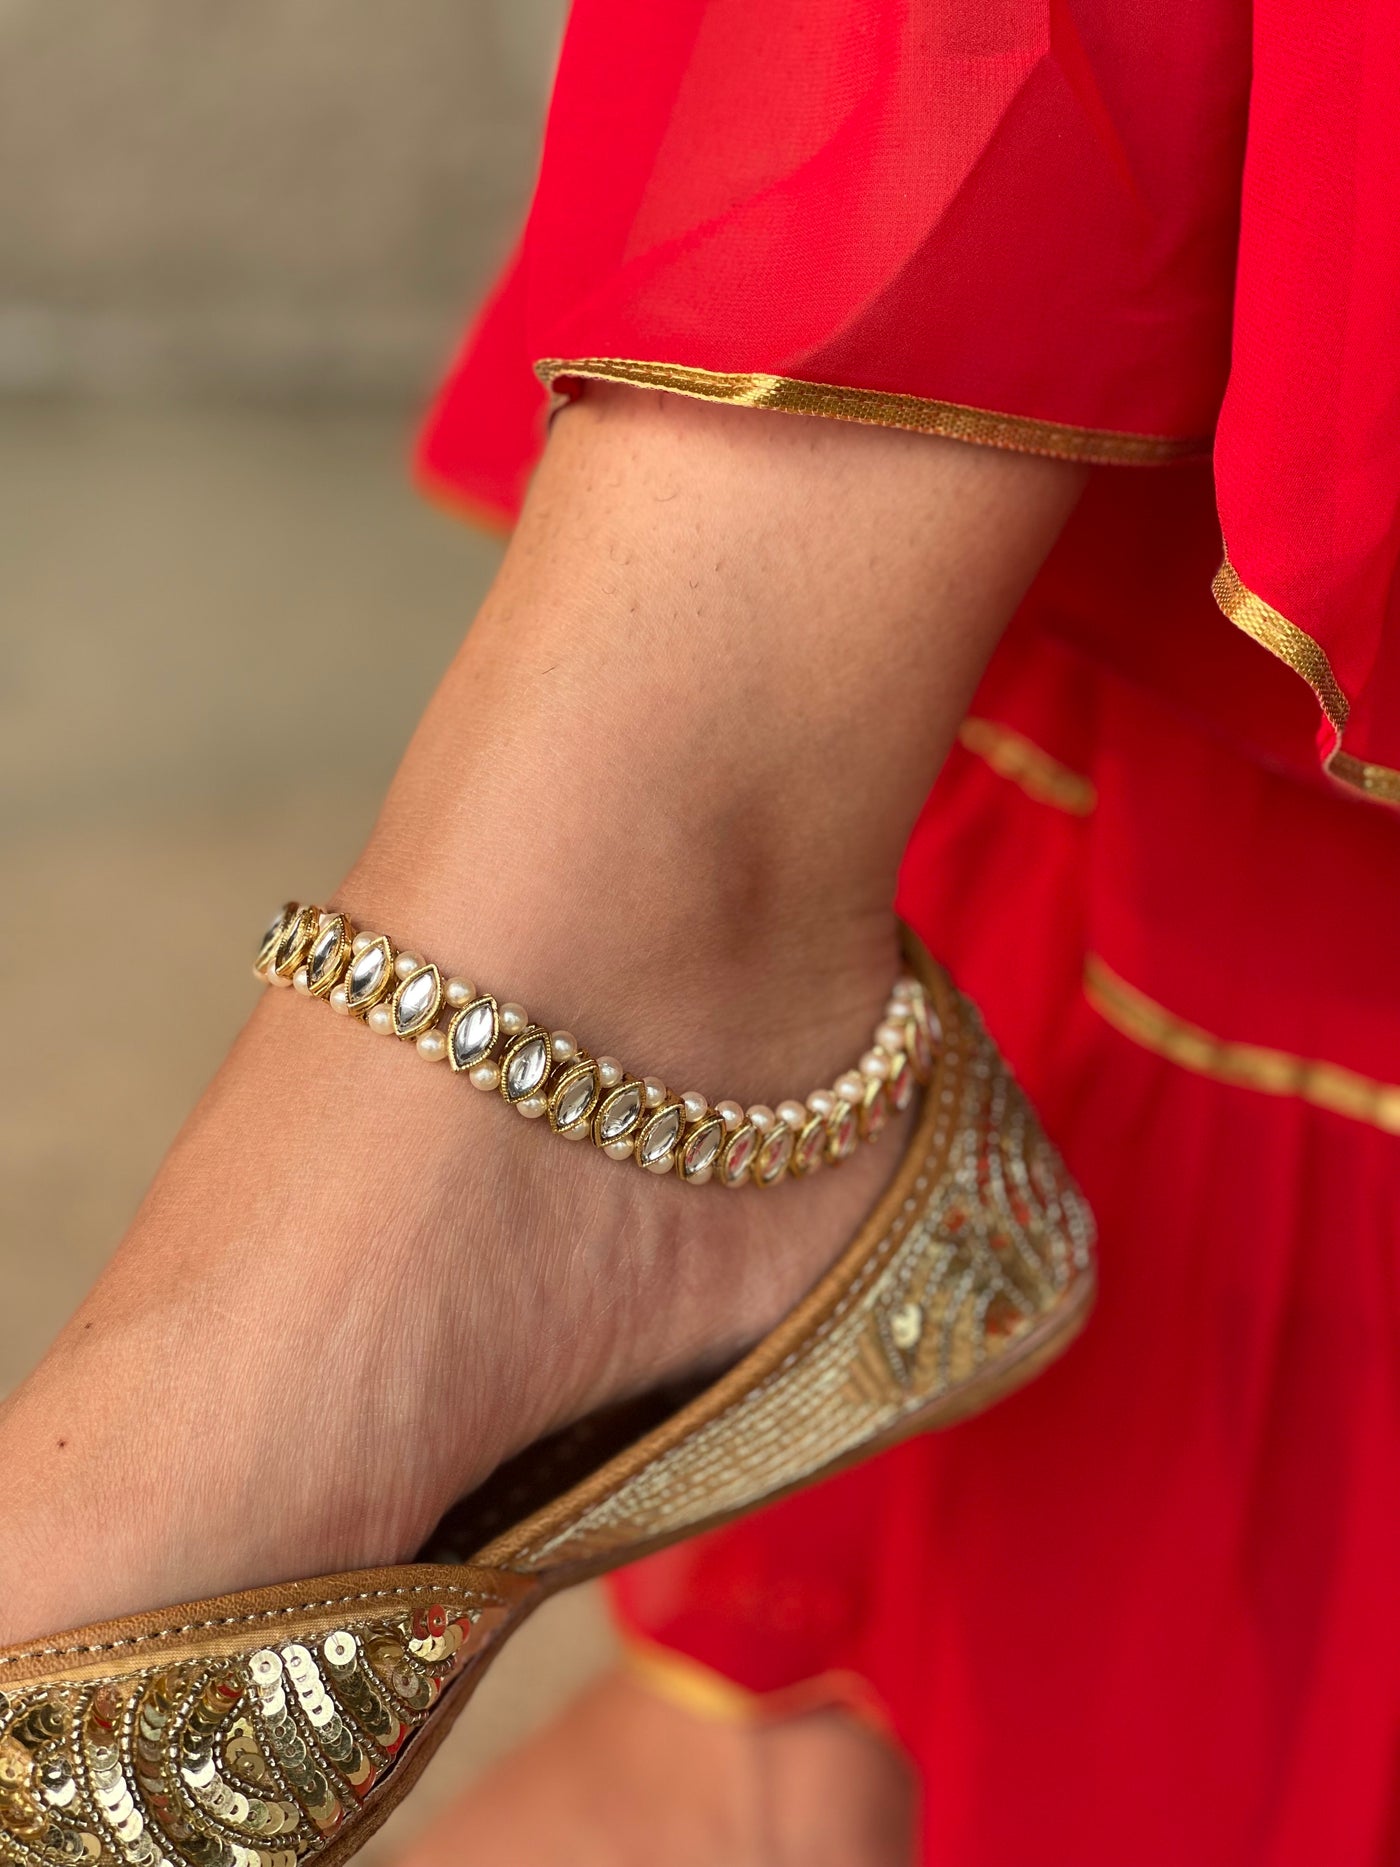 What is the origin and significance of toe rings worn by married Indian  women? - Quora